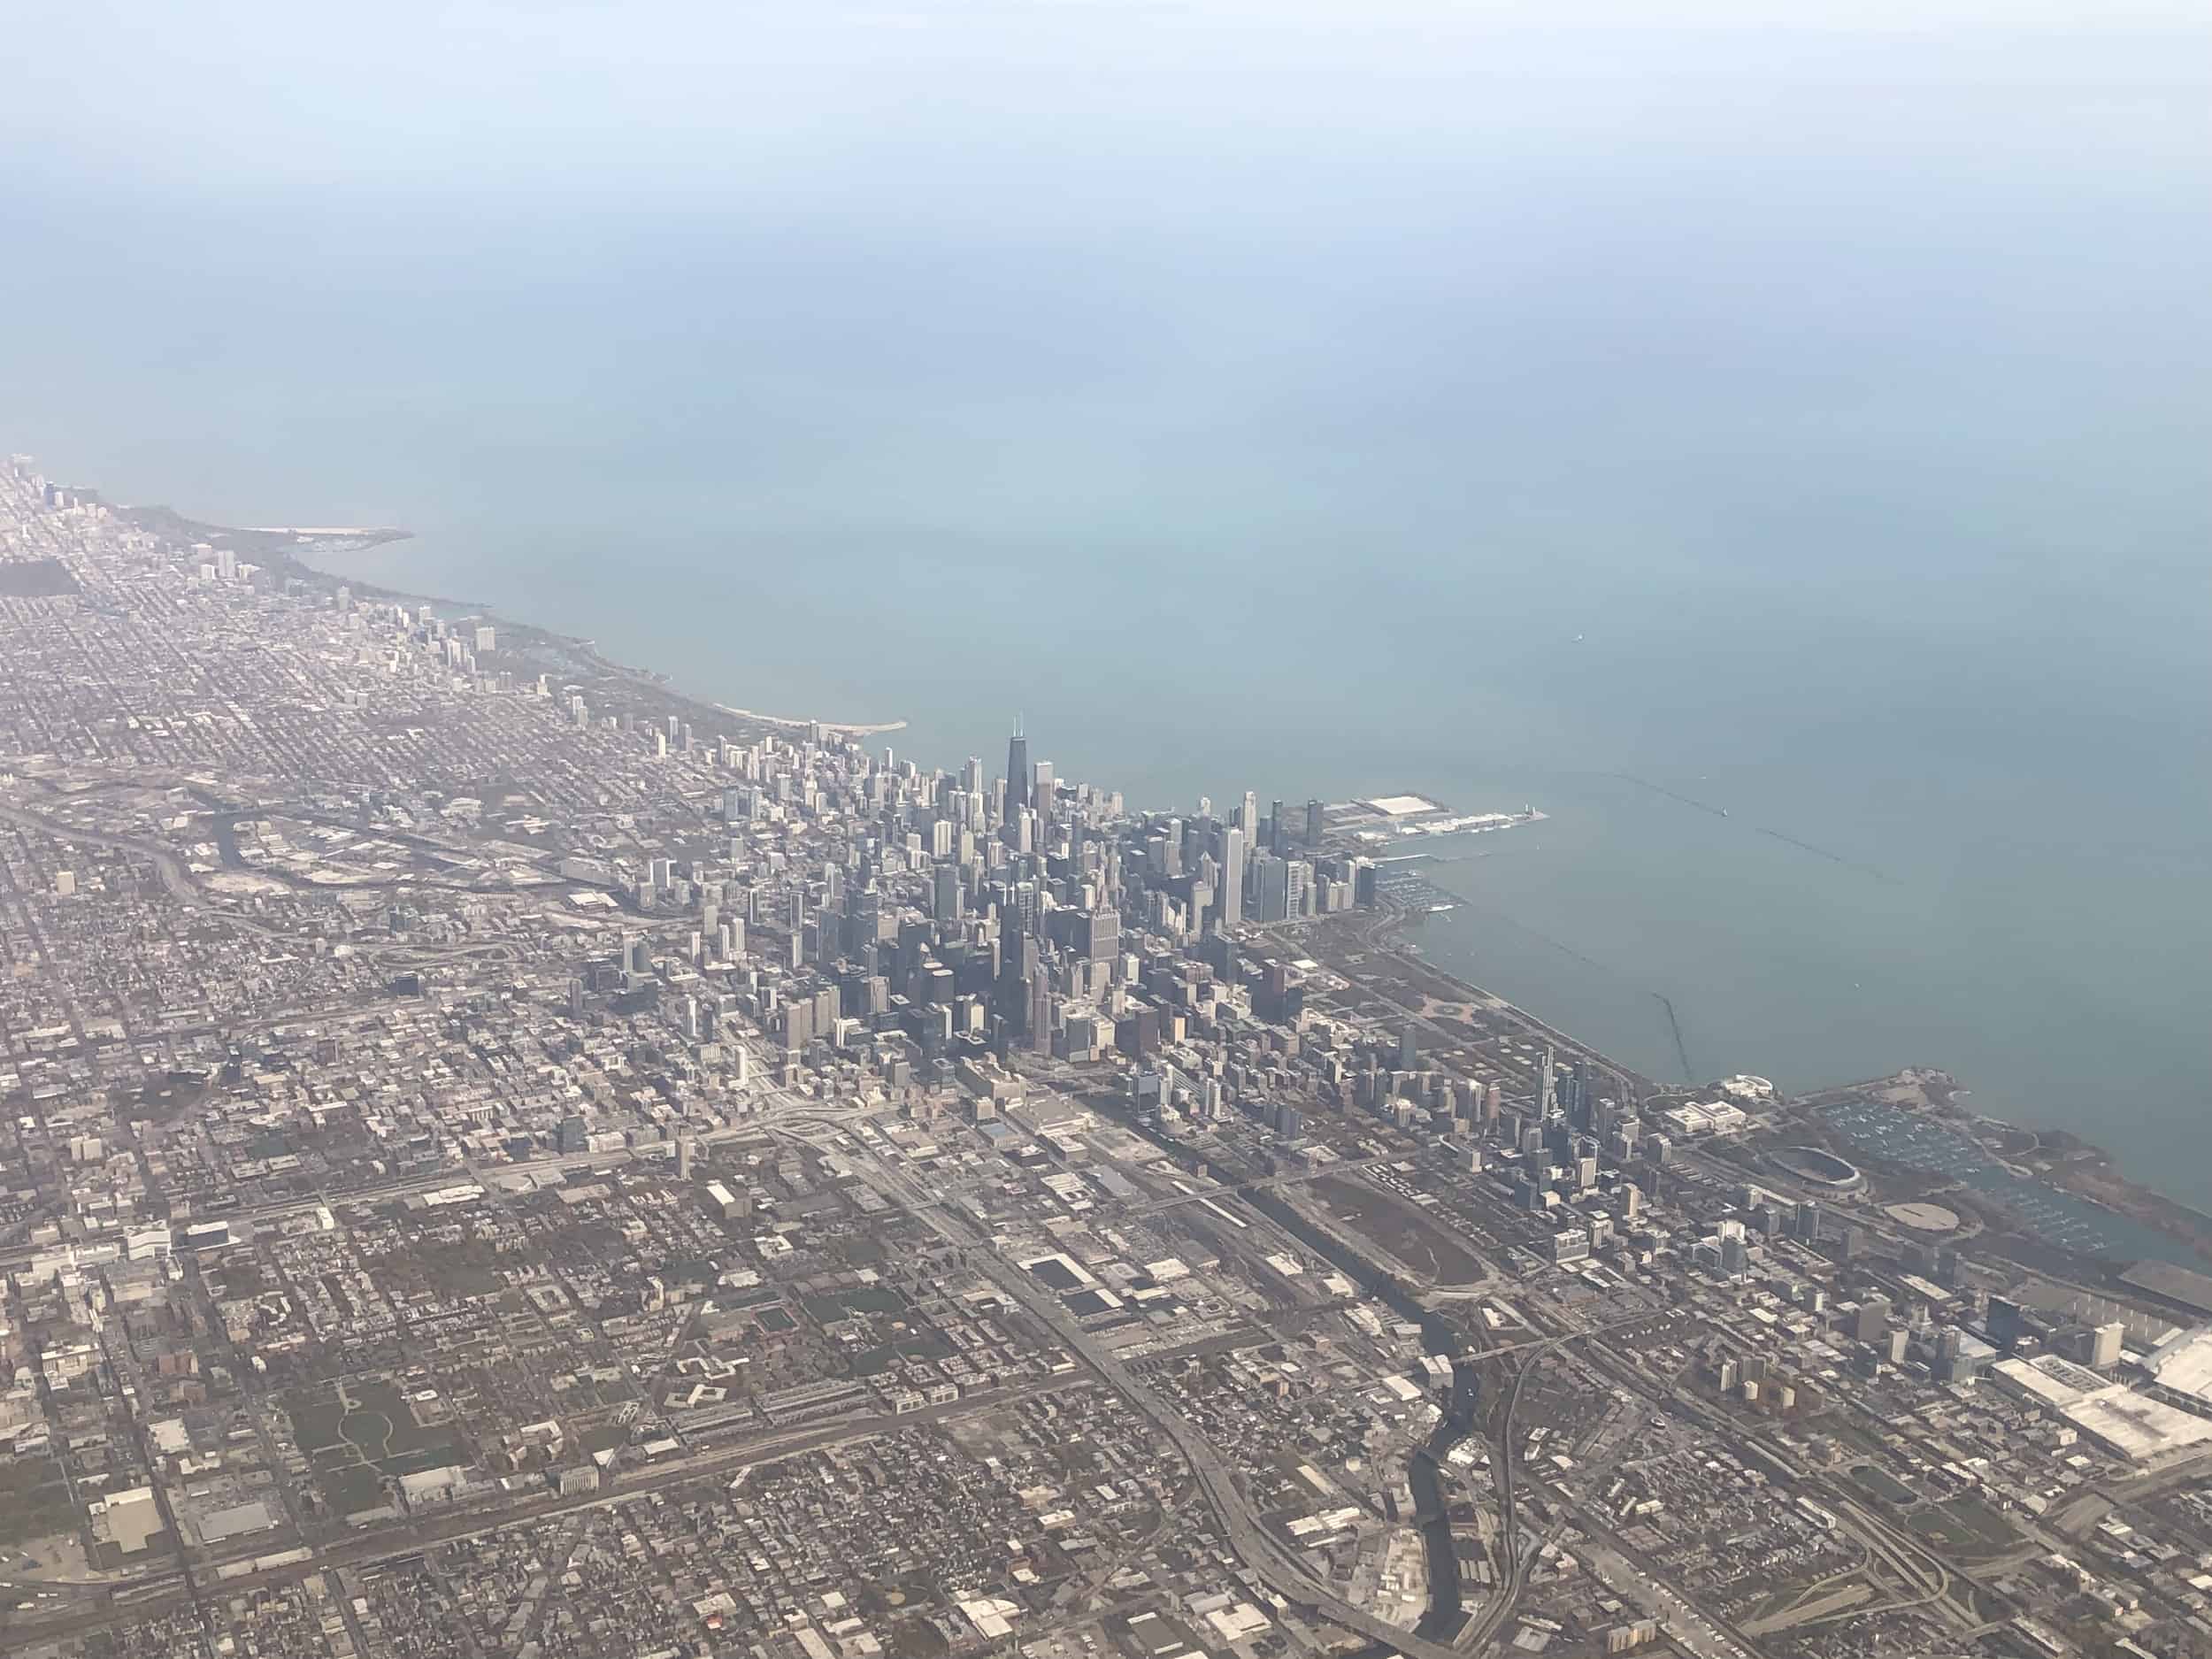 Flying over the city of Chicago, Illinois